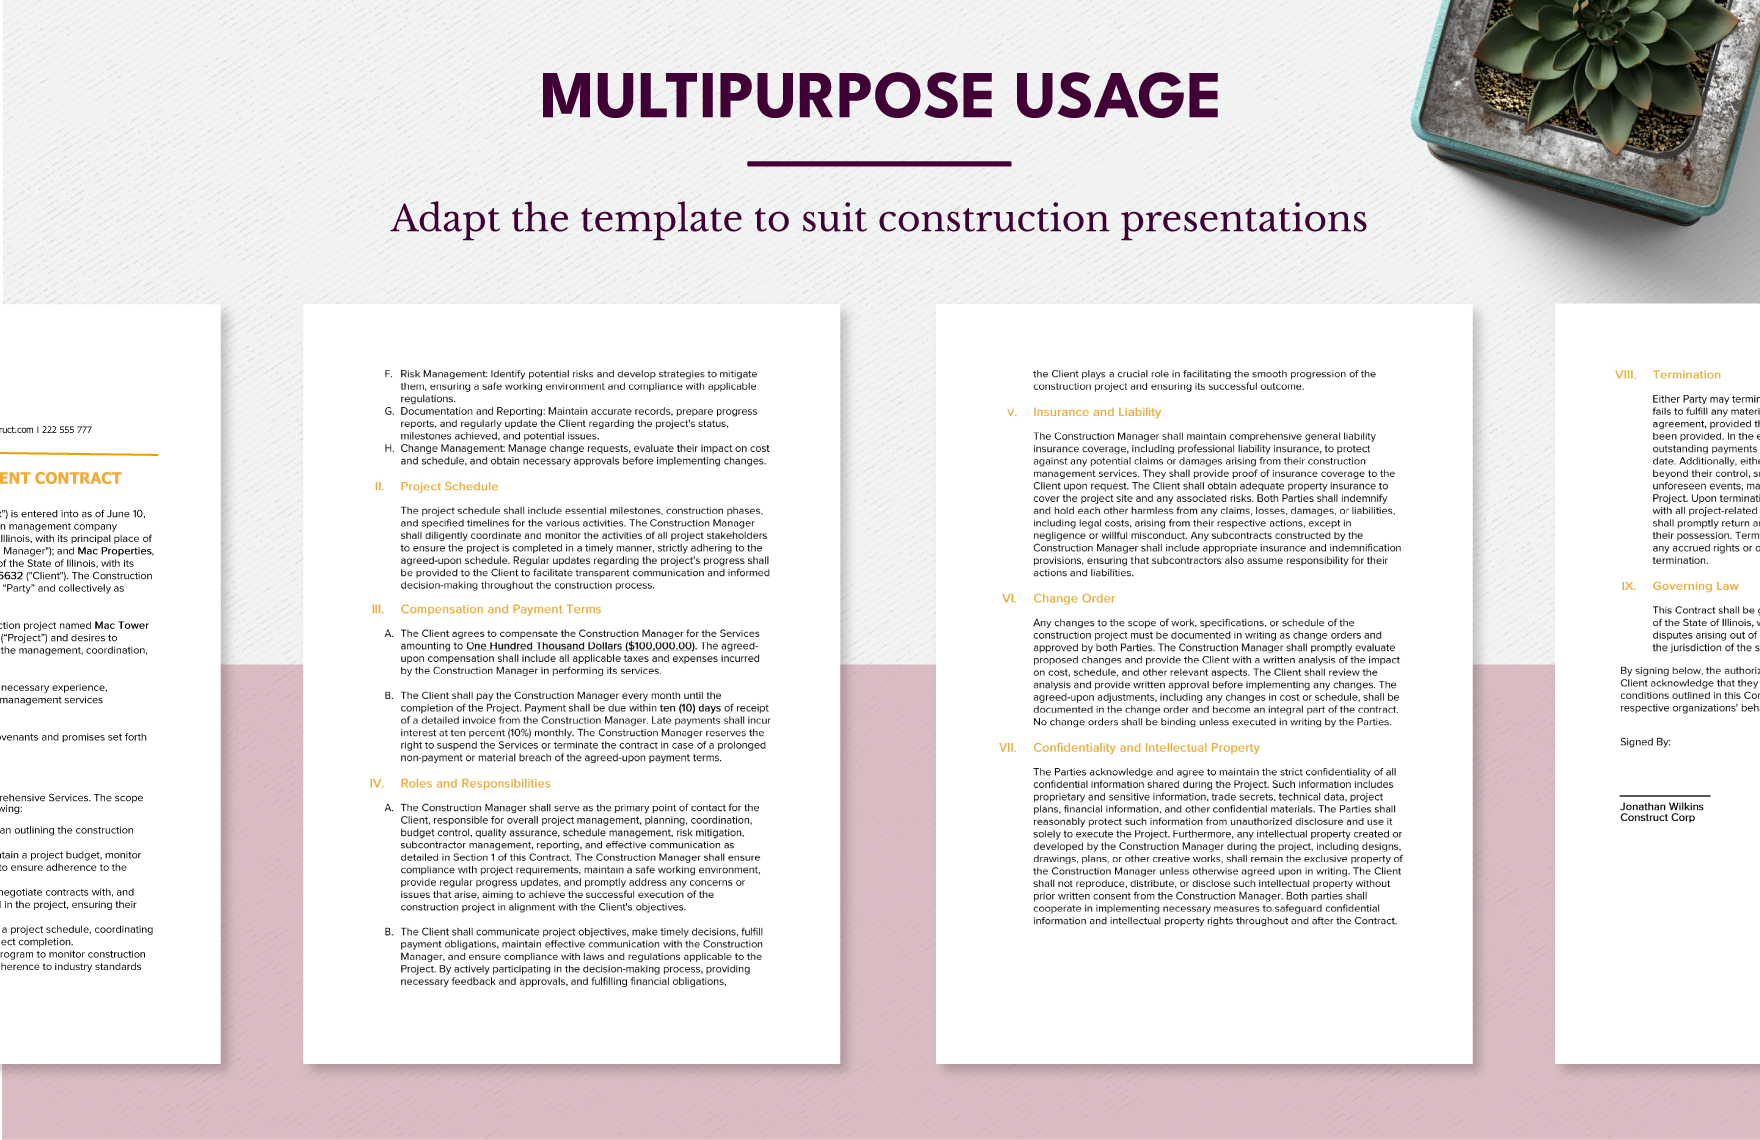 Construction Management Contract Template